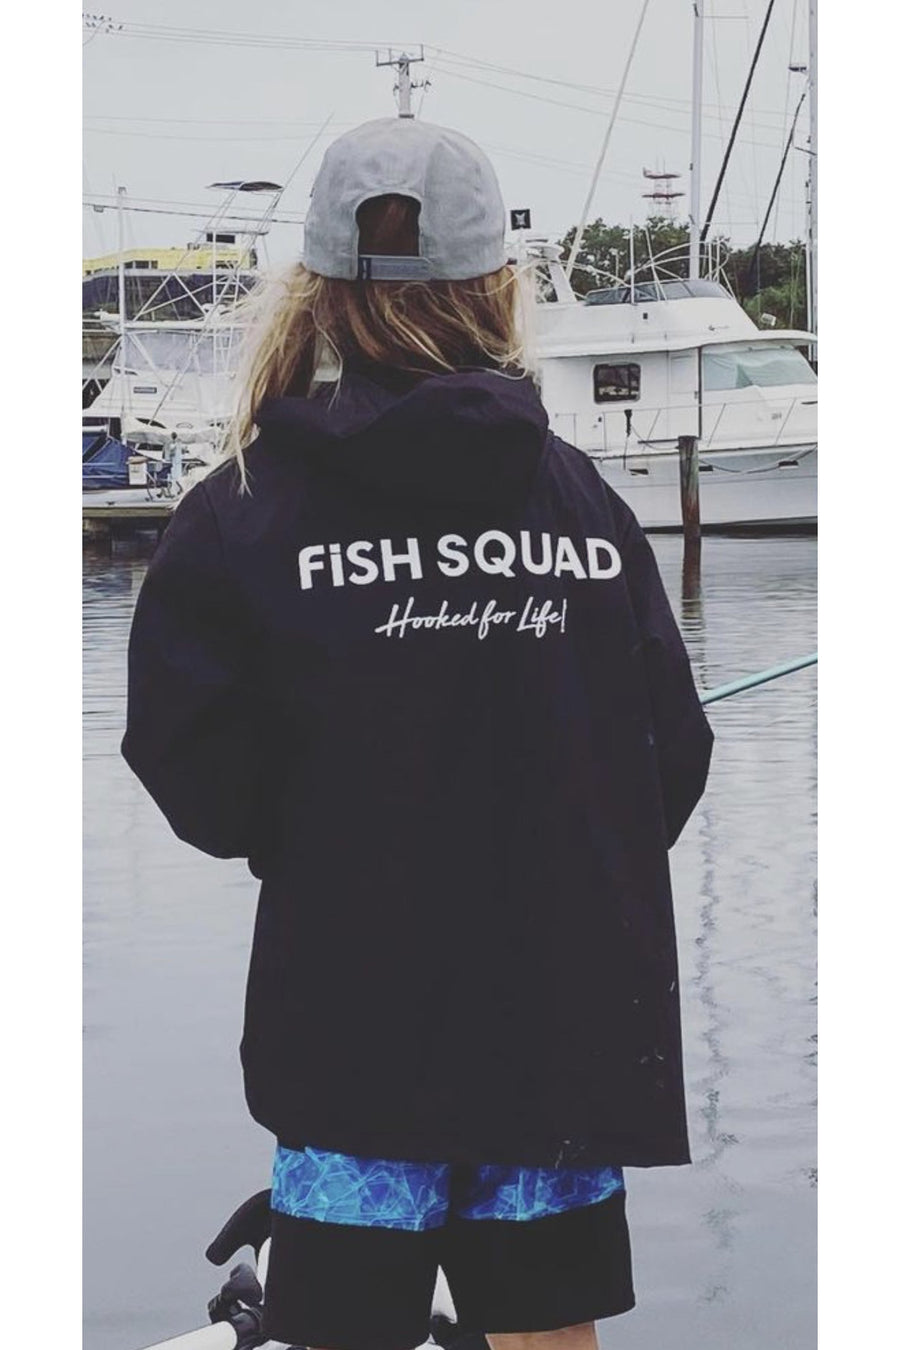 Fish Squad - Hooked For Life - Youth Outdoor Sport Rainjacket